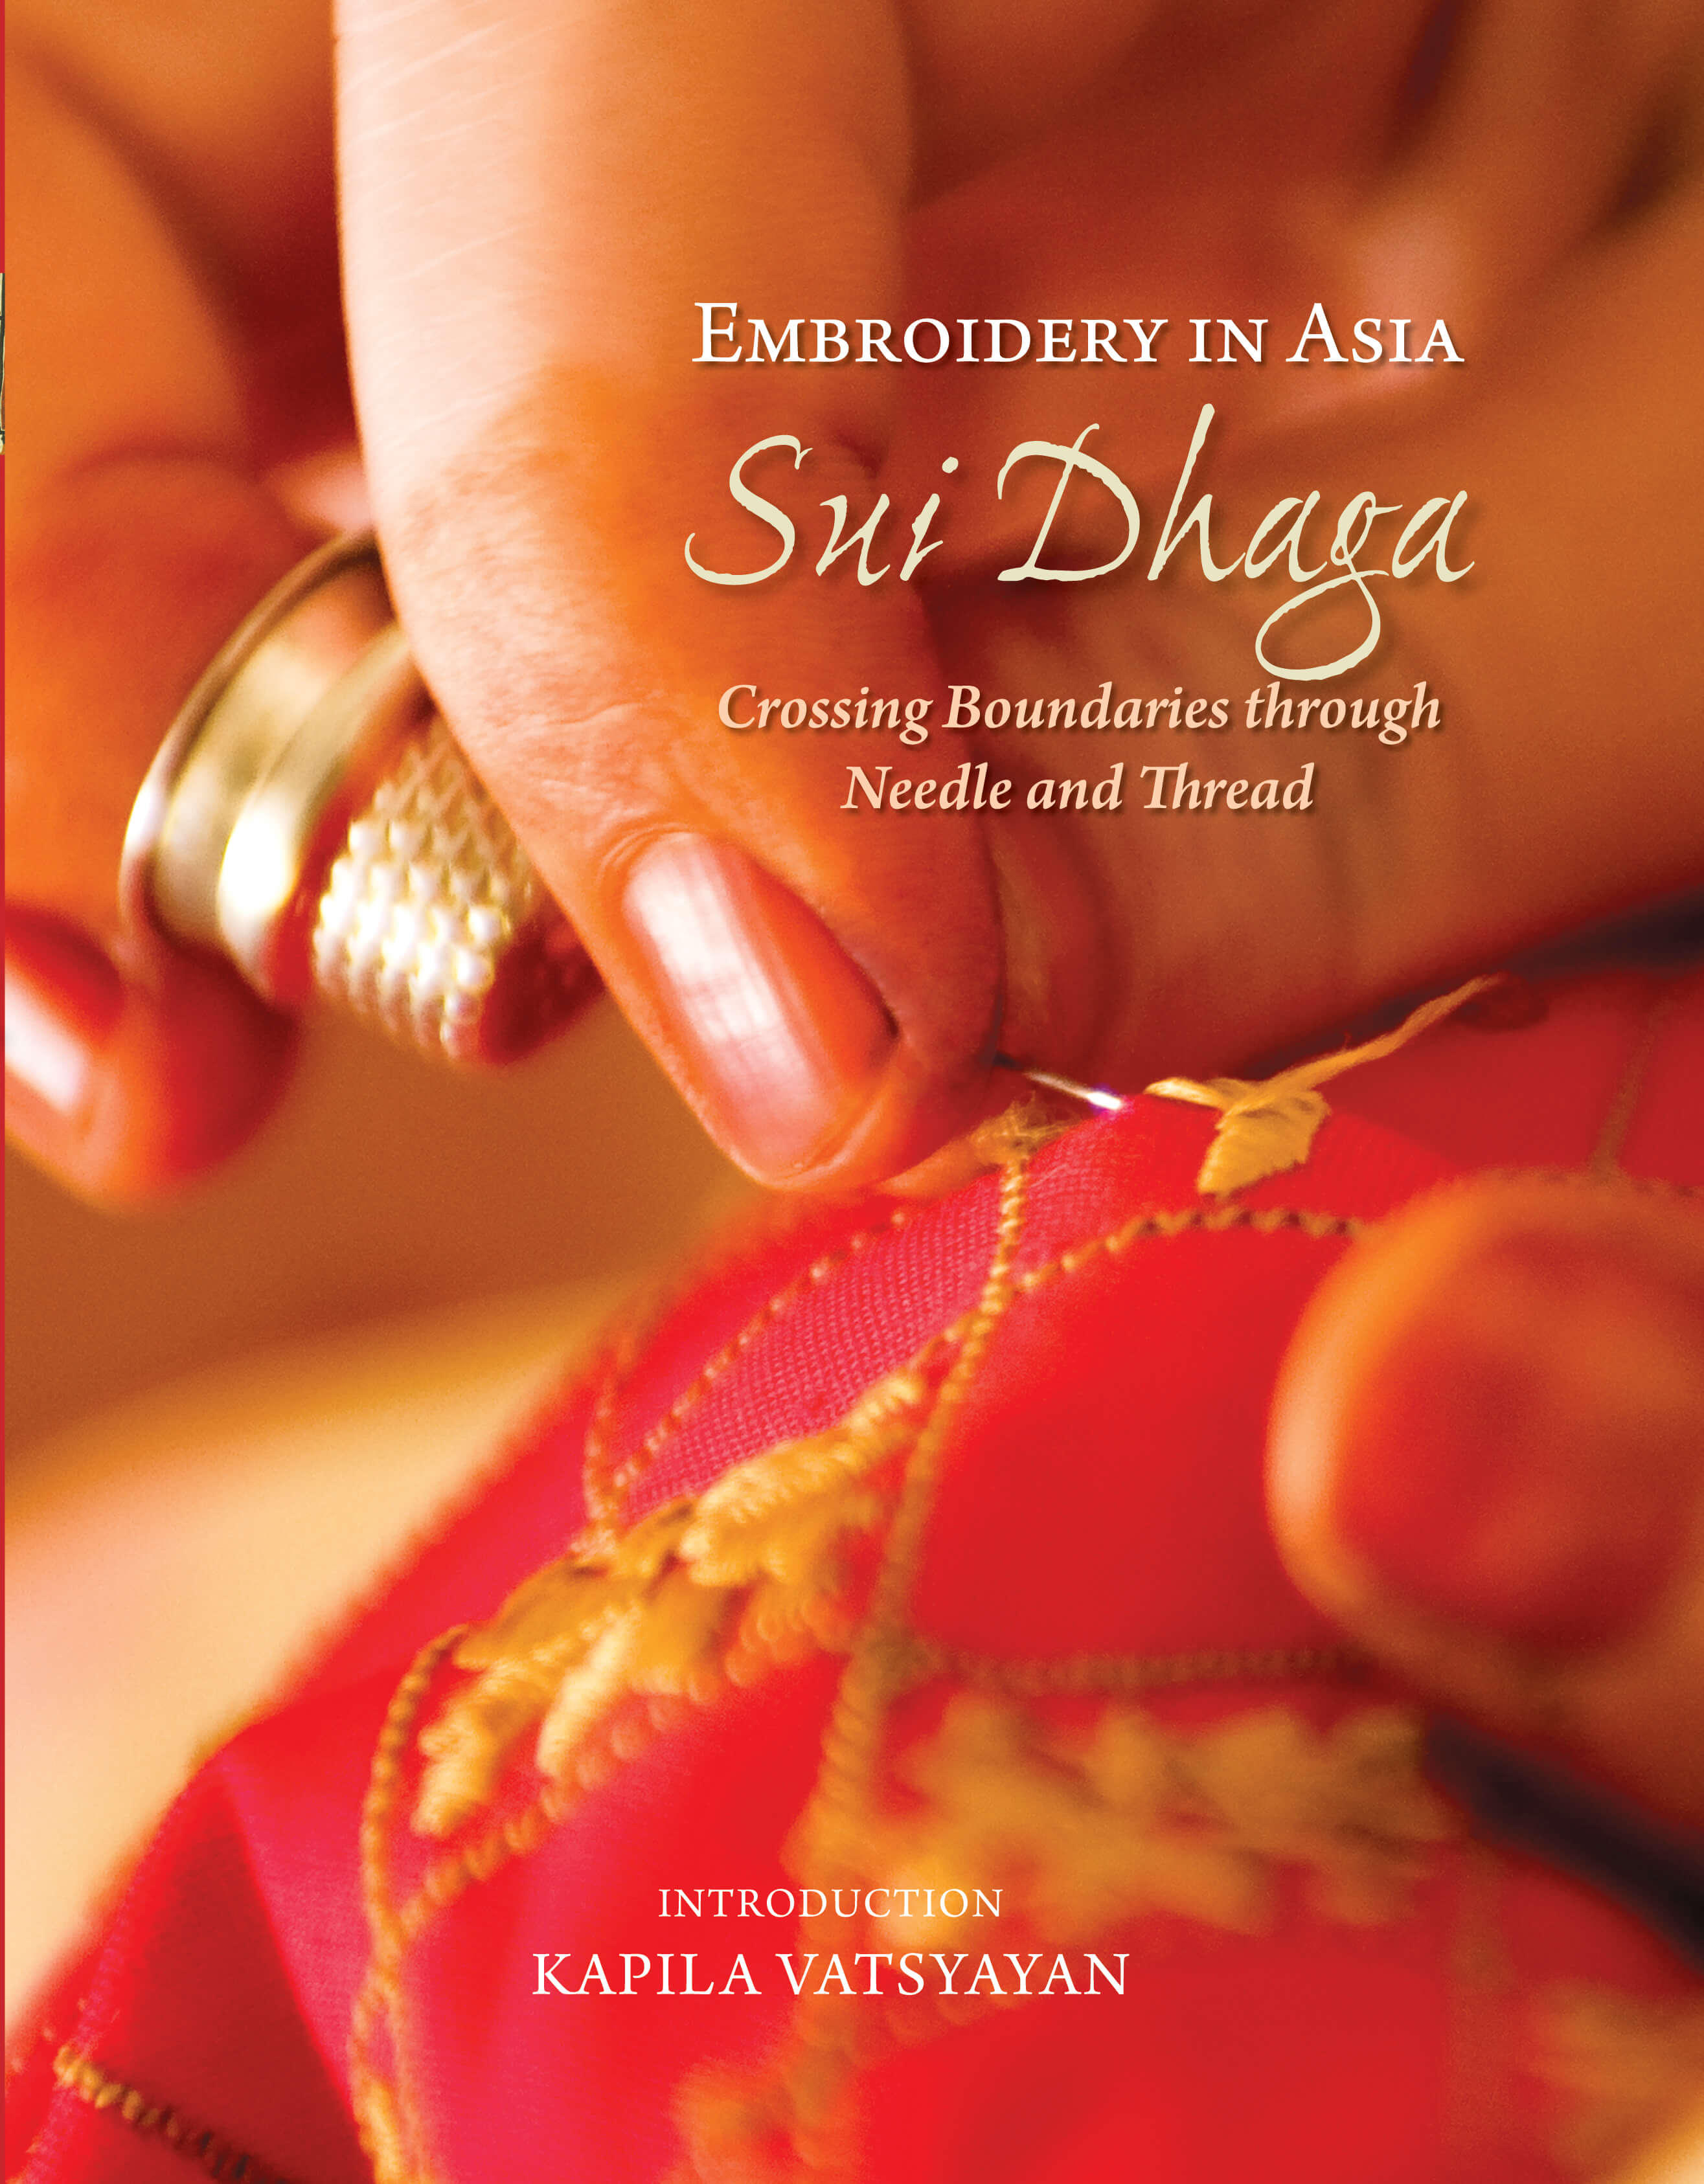 Embroidery In Asia—Sui Dhaga: Crossing Boundaries Through Needle And Thread